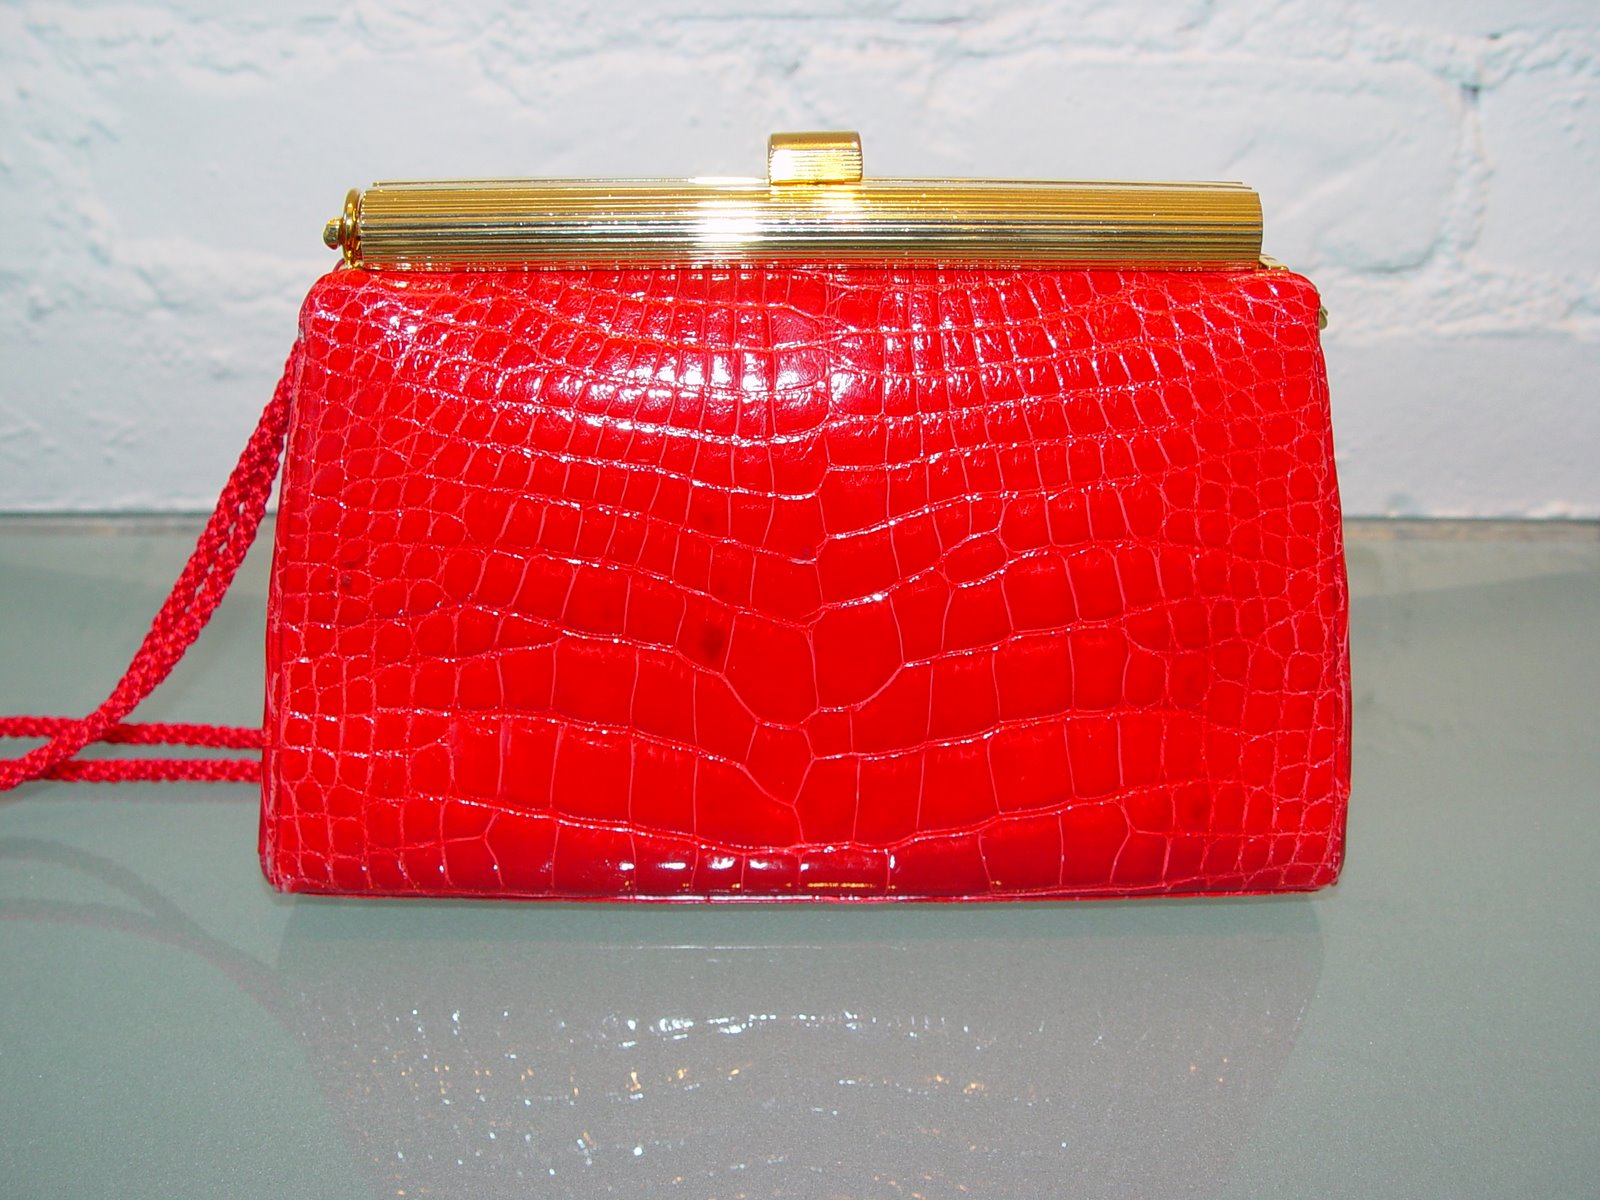 [JUDITH+LEIBER+LIPSICK+RED+LEIBER+PURSE+WITH+GOLD+FRAME+CLASP+AND+OPTIONAL+ROPE+STRAP+8+BY+5+APPROX+SOME+SPOTS.JPG.JPG]